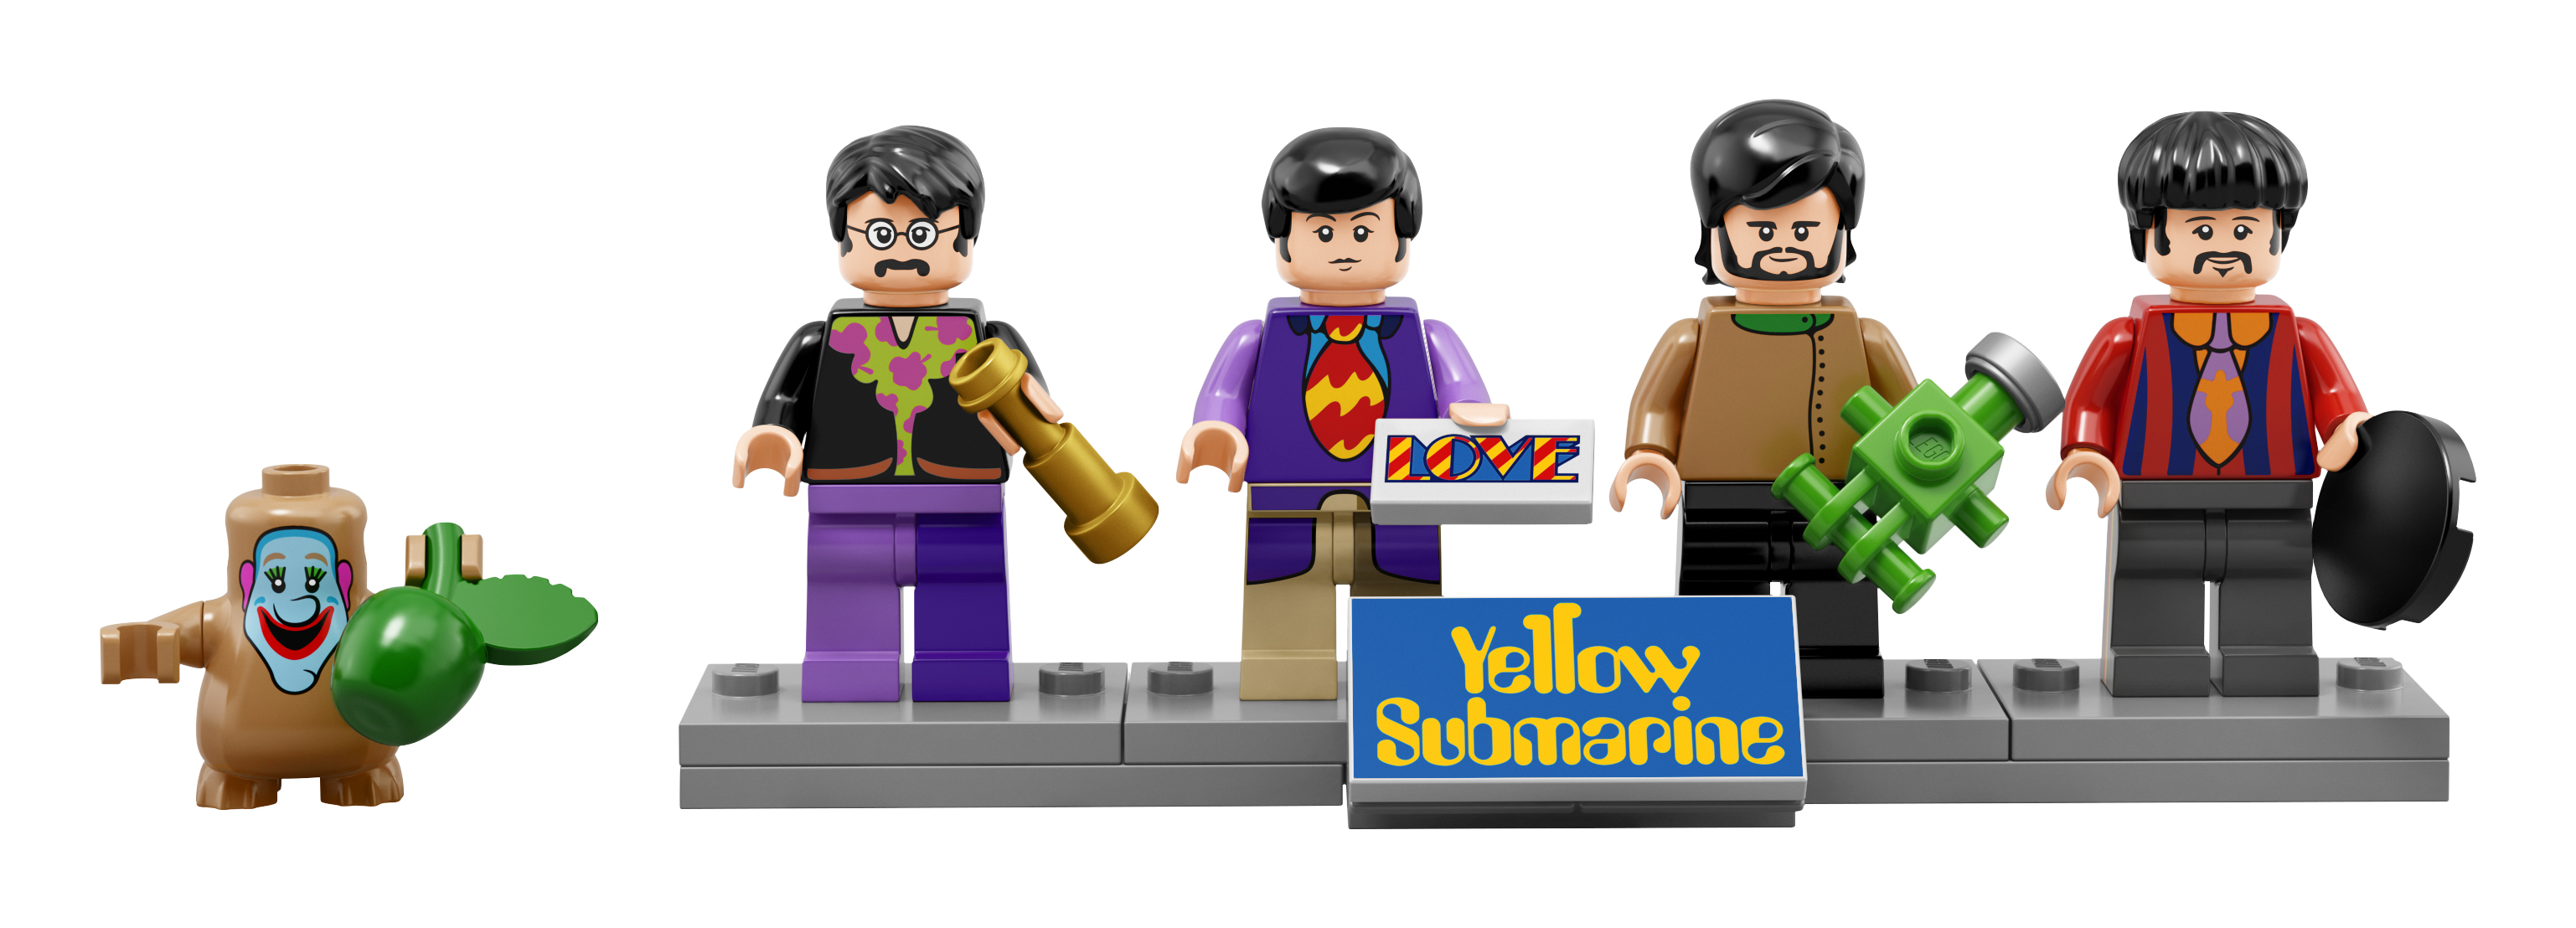 Trænge ind Grape Mindre Beatles LEGO Yellow Submarine Building Kit matching Amazon all-time low:  $48 (Reg. $70)